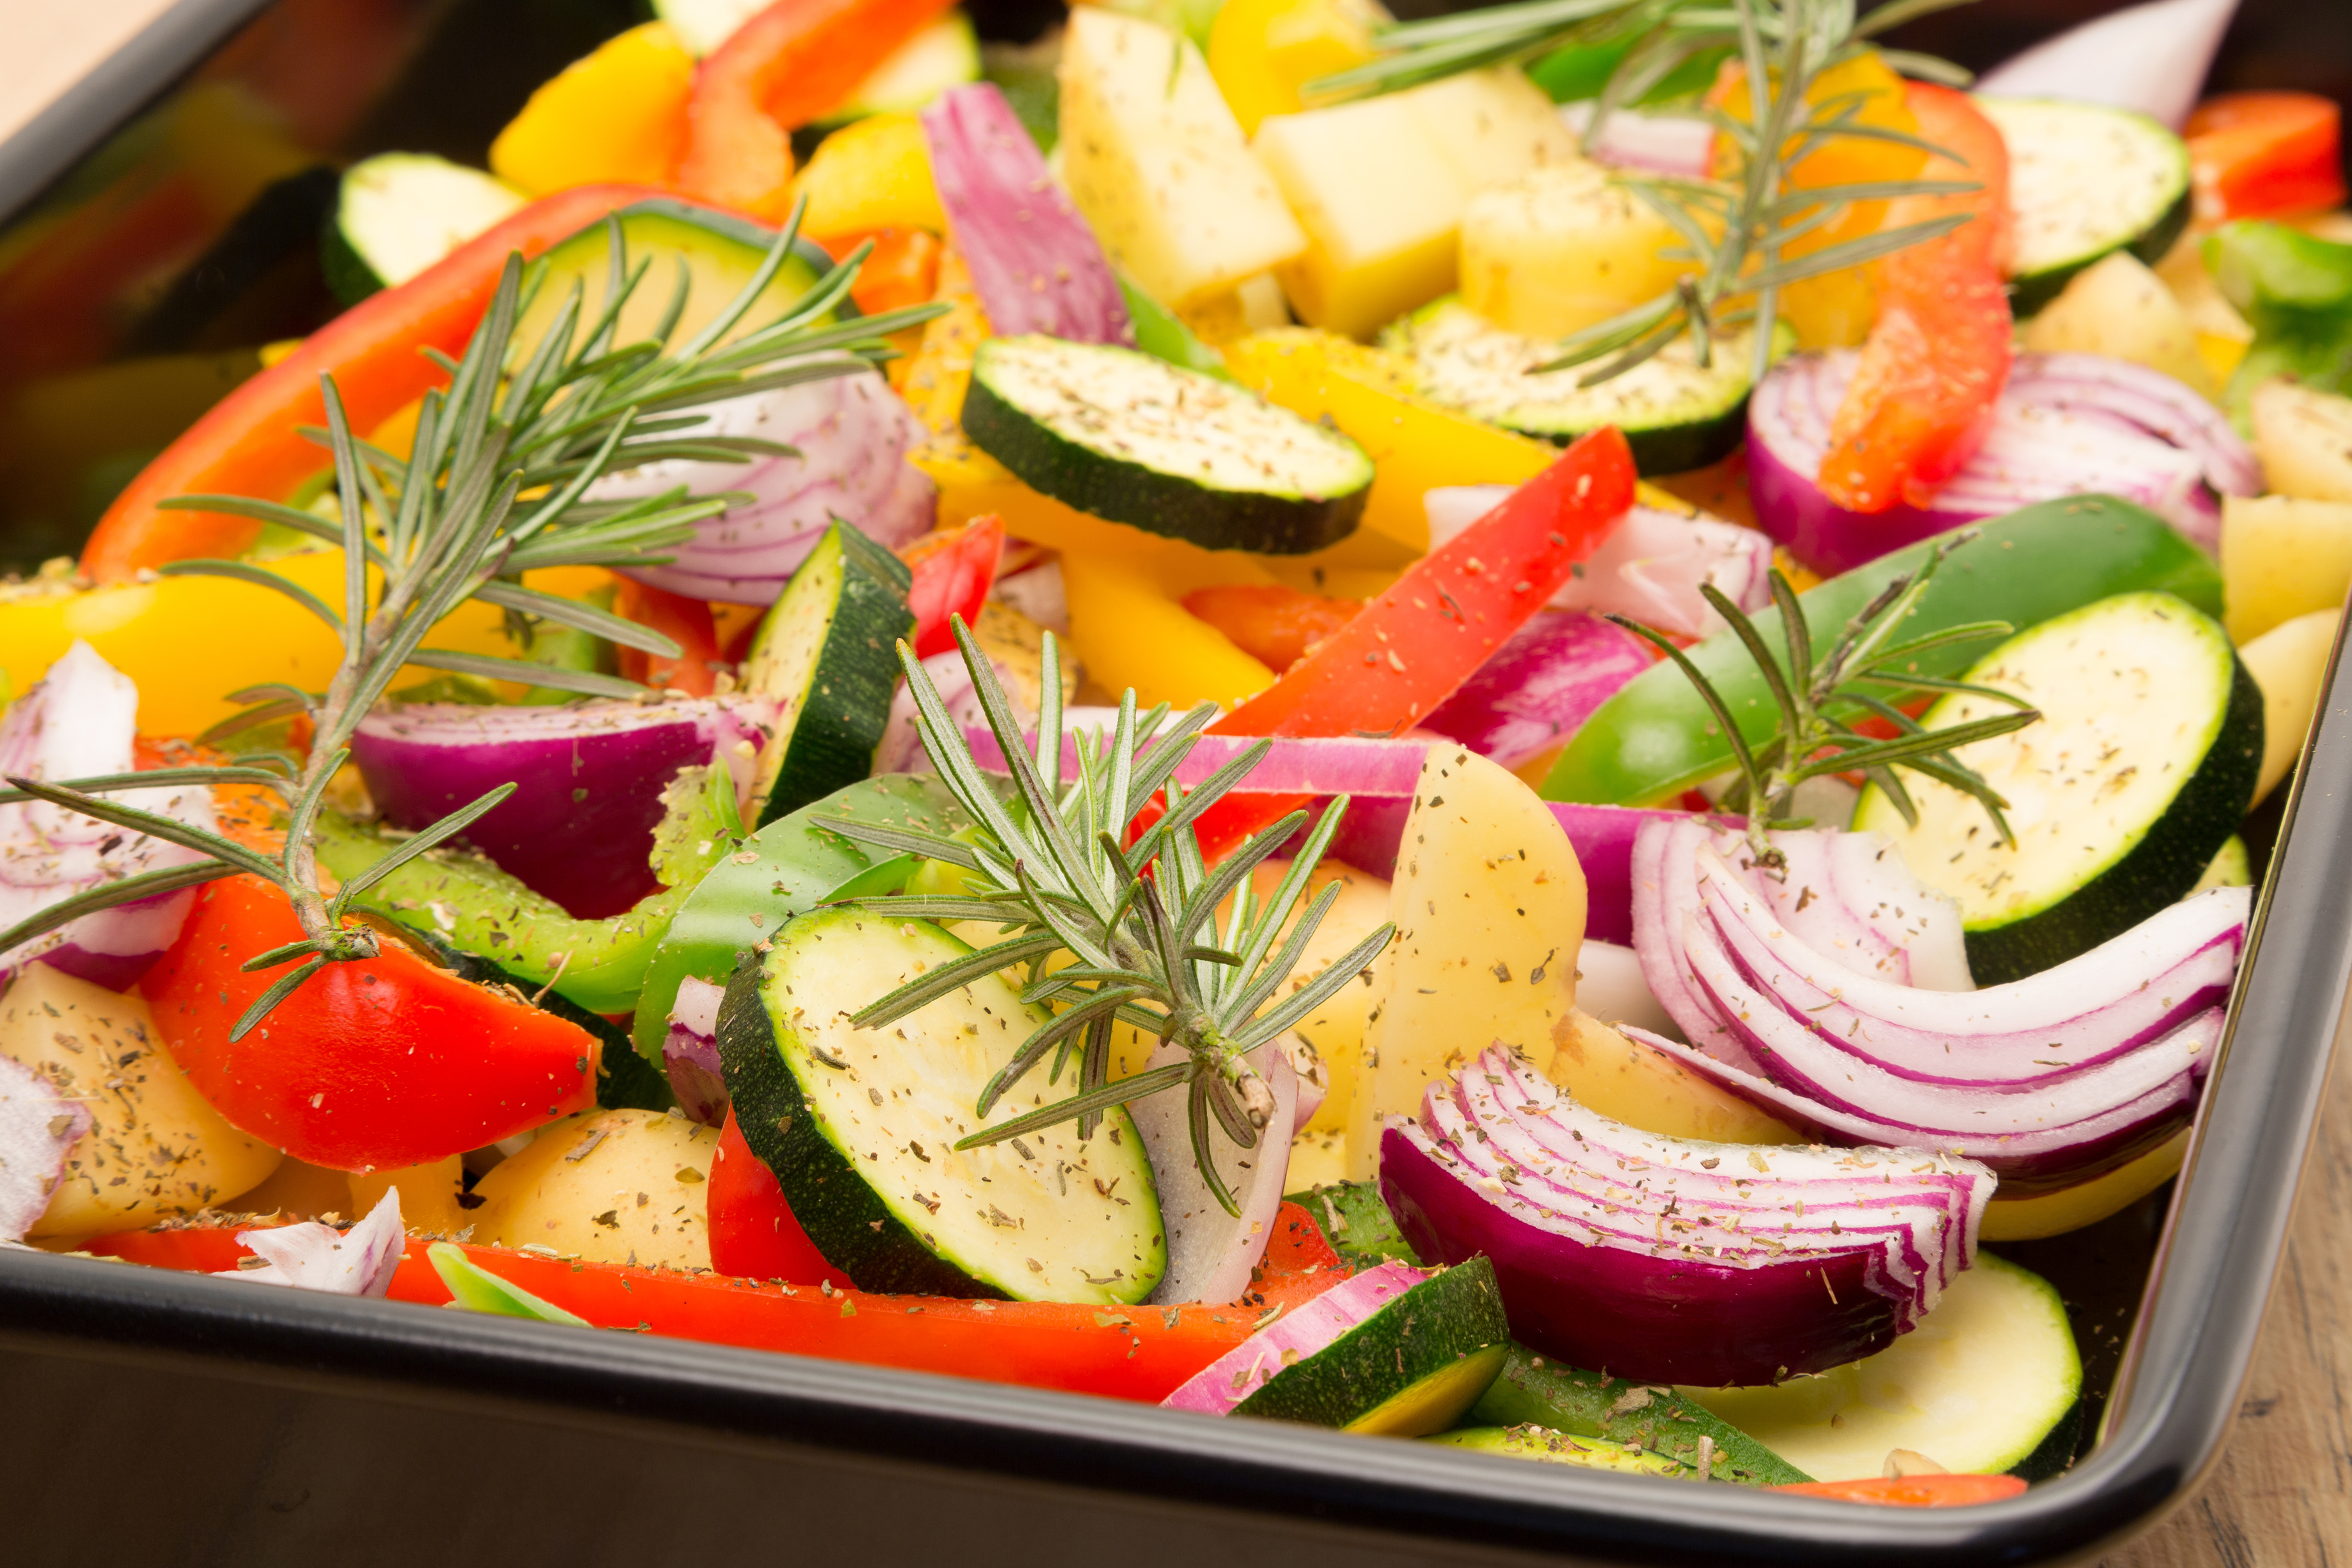 Variety of veggies getting roasted on a pan with seasoning